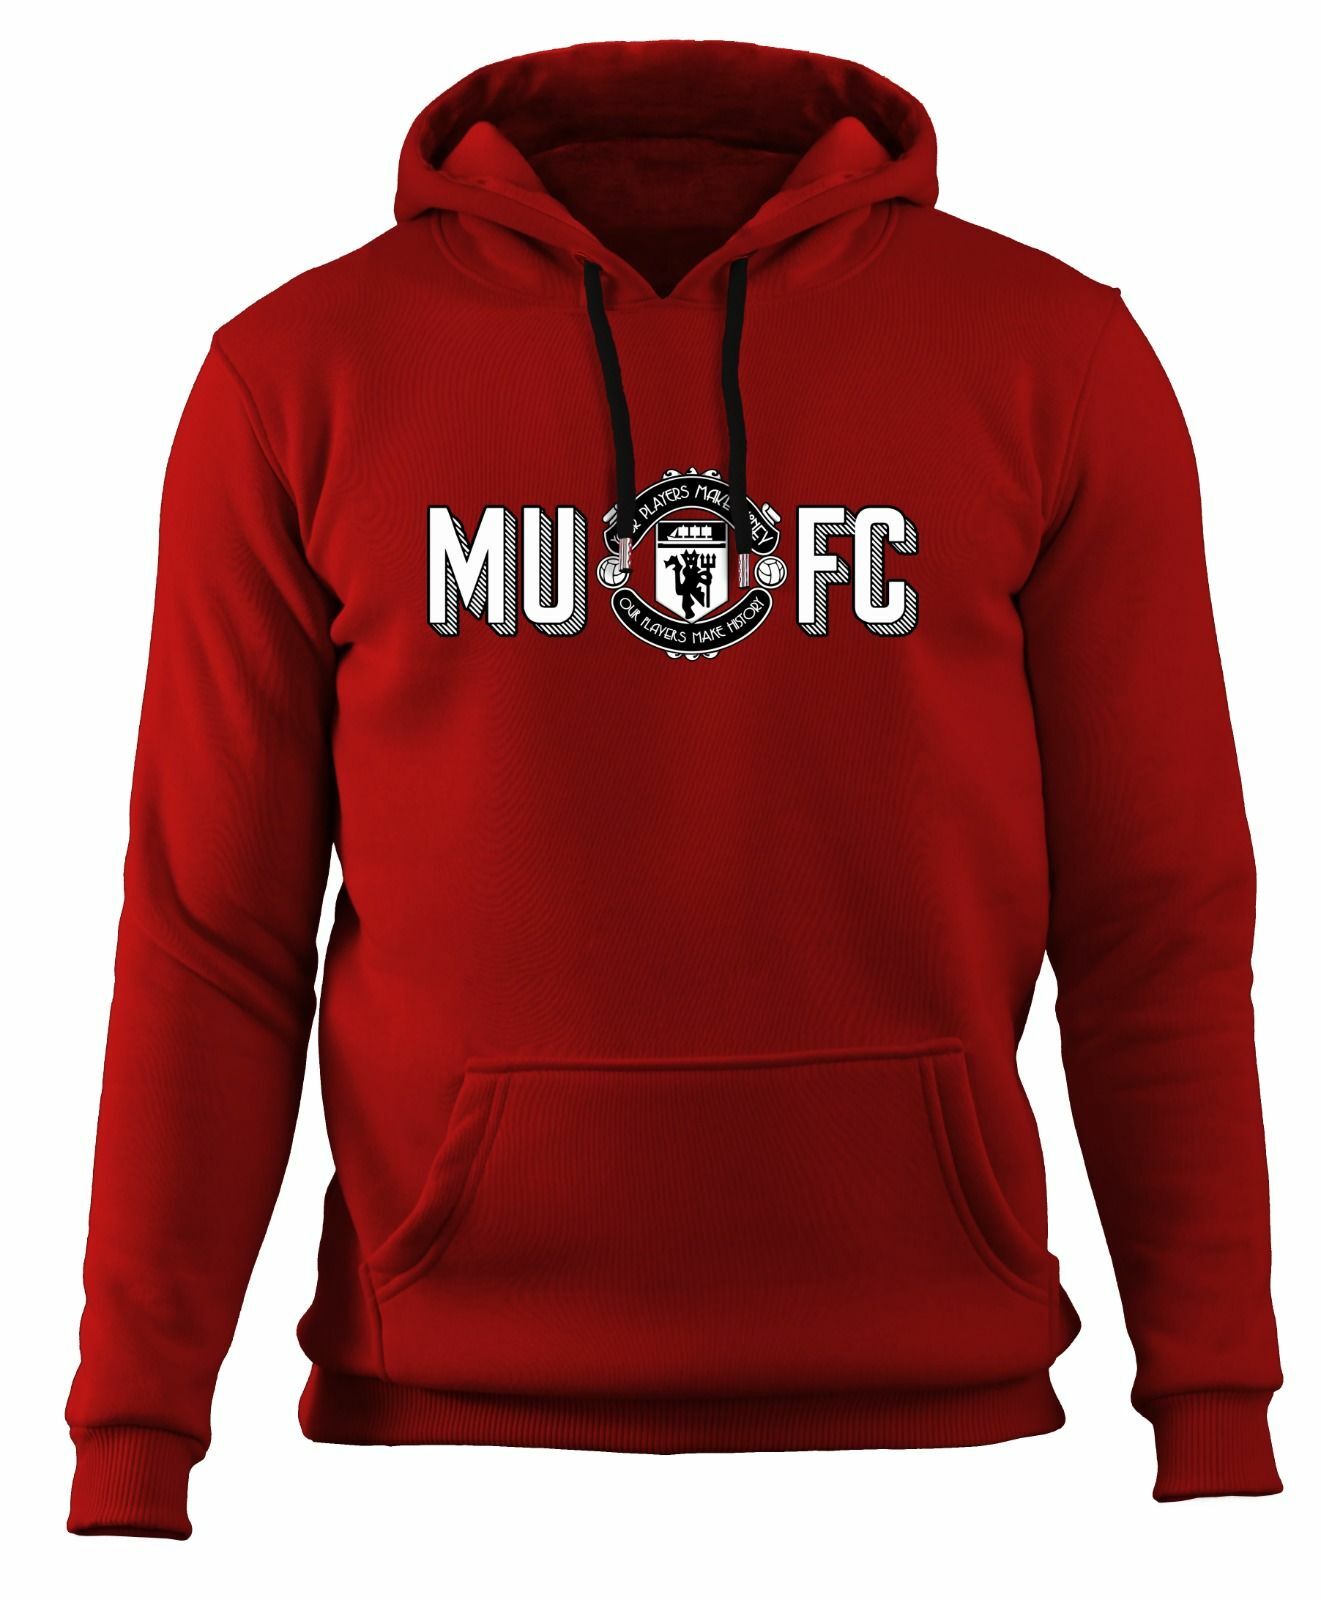 Manchester United - MUFC 'Our Players' Sweatshirt